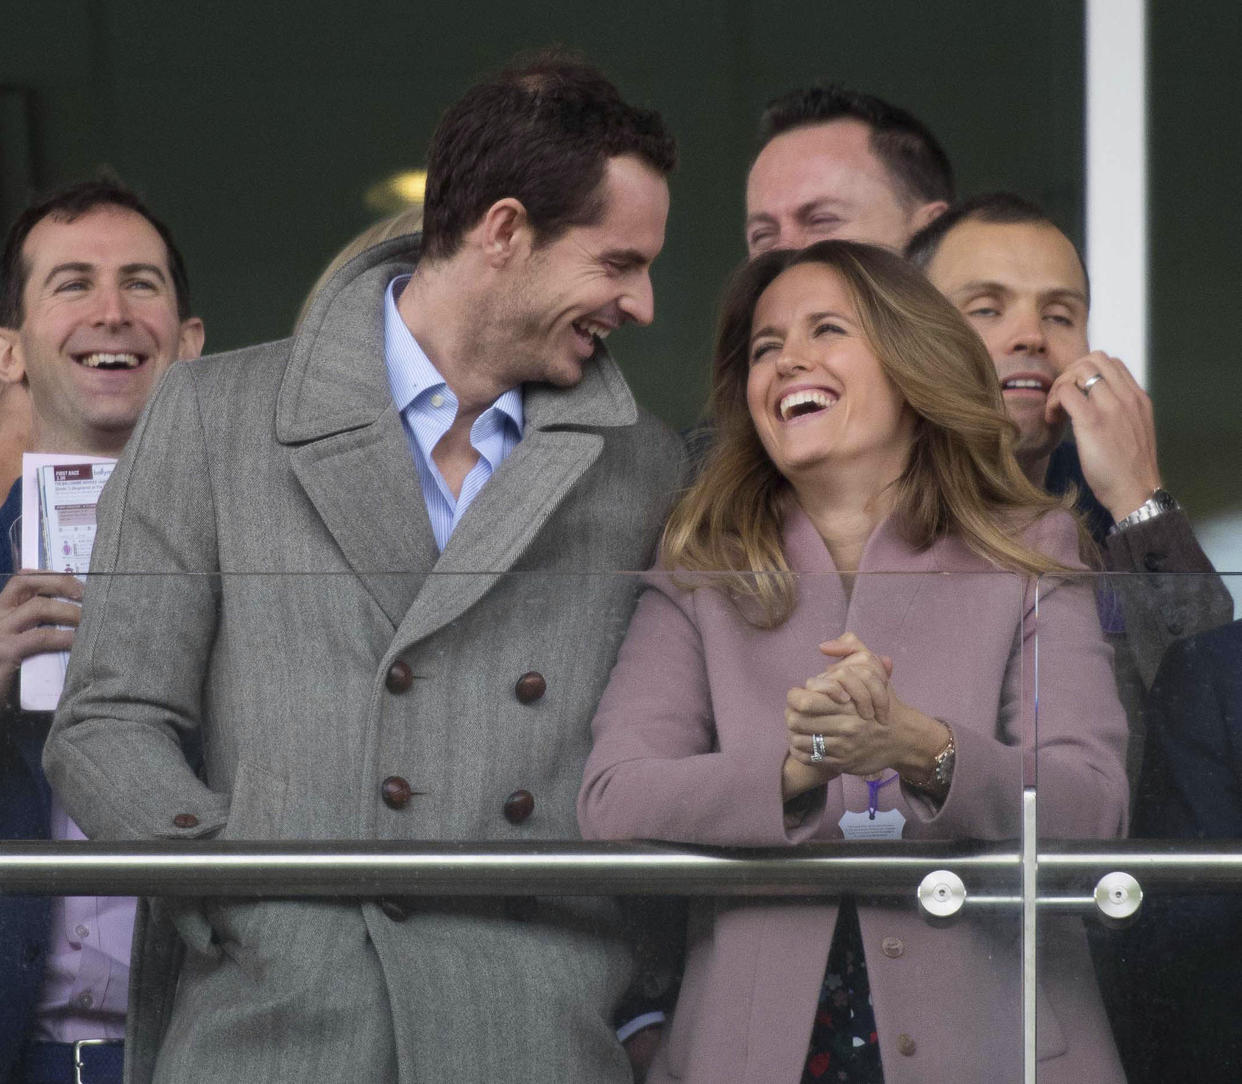 Photo by: zz/KGC-09/STAR MAX/IPx 2019 3/13/19 Andy Murray and his wife Kim Sears at the Cheltenham Festival. (Cheltenham, England, UK)